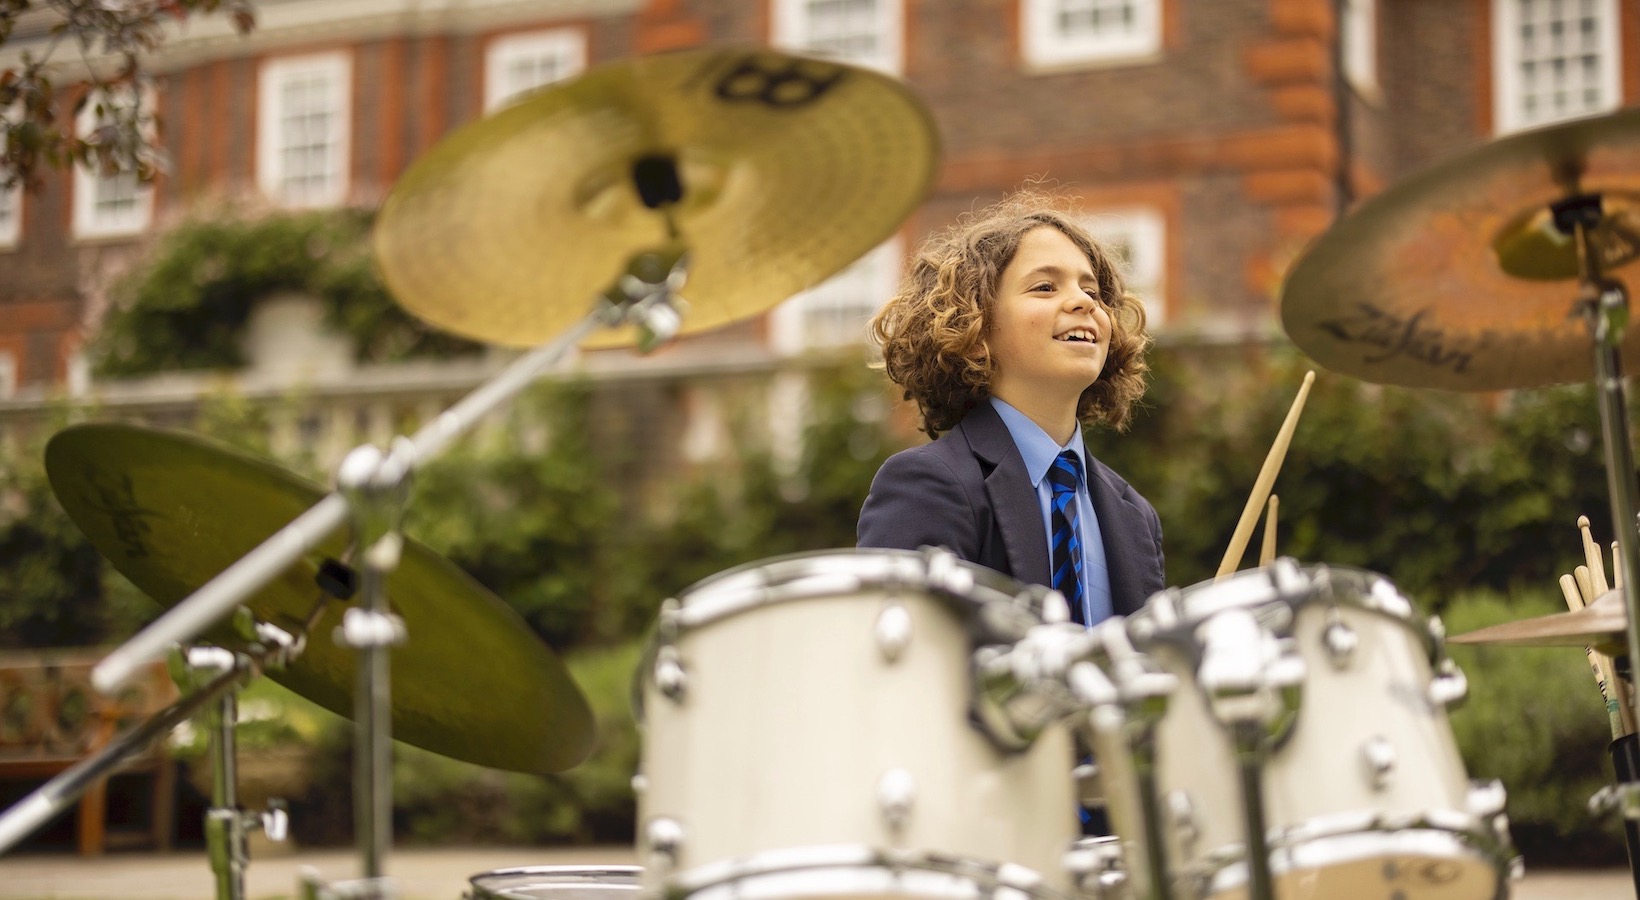 Senior pupil playing the drum at Ibstock Place School, a private school near Richmond